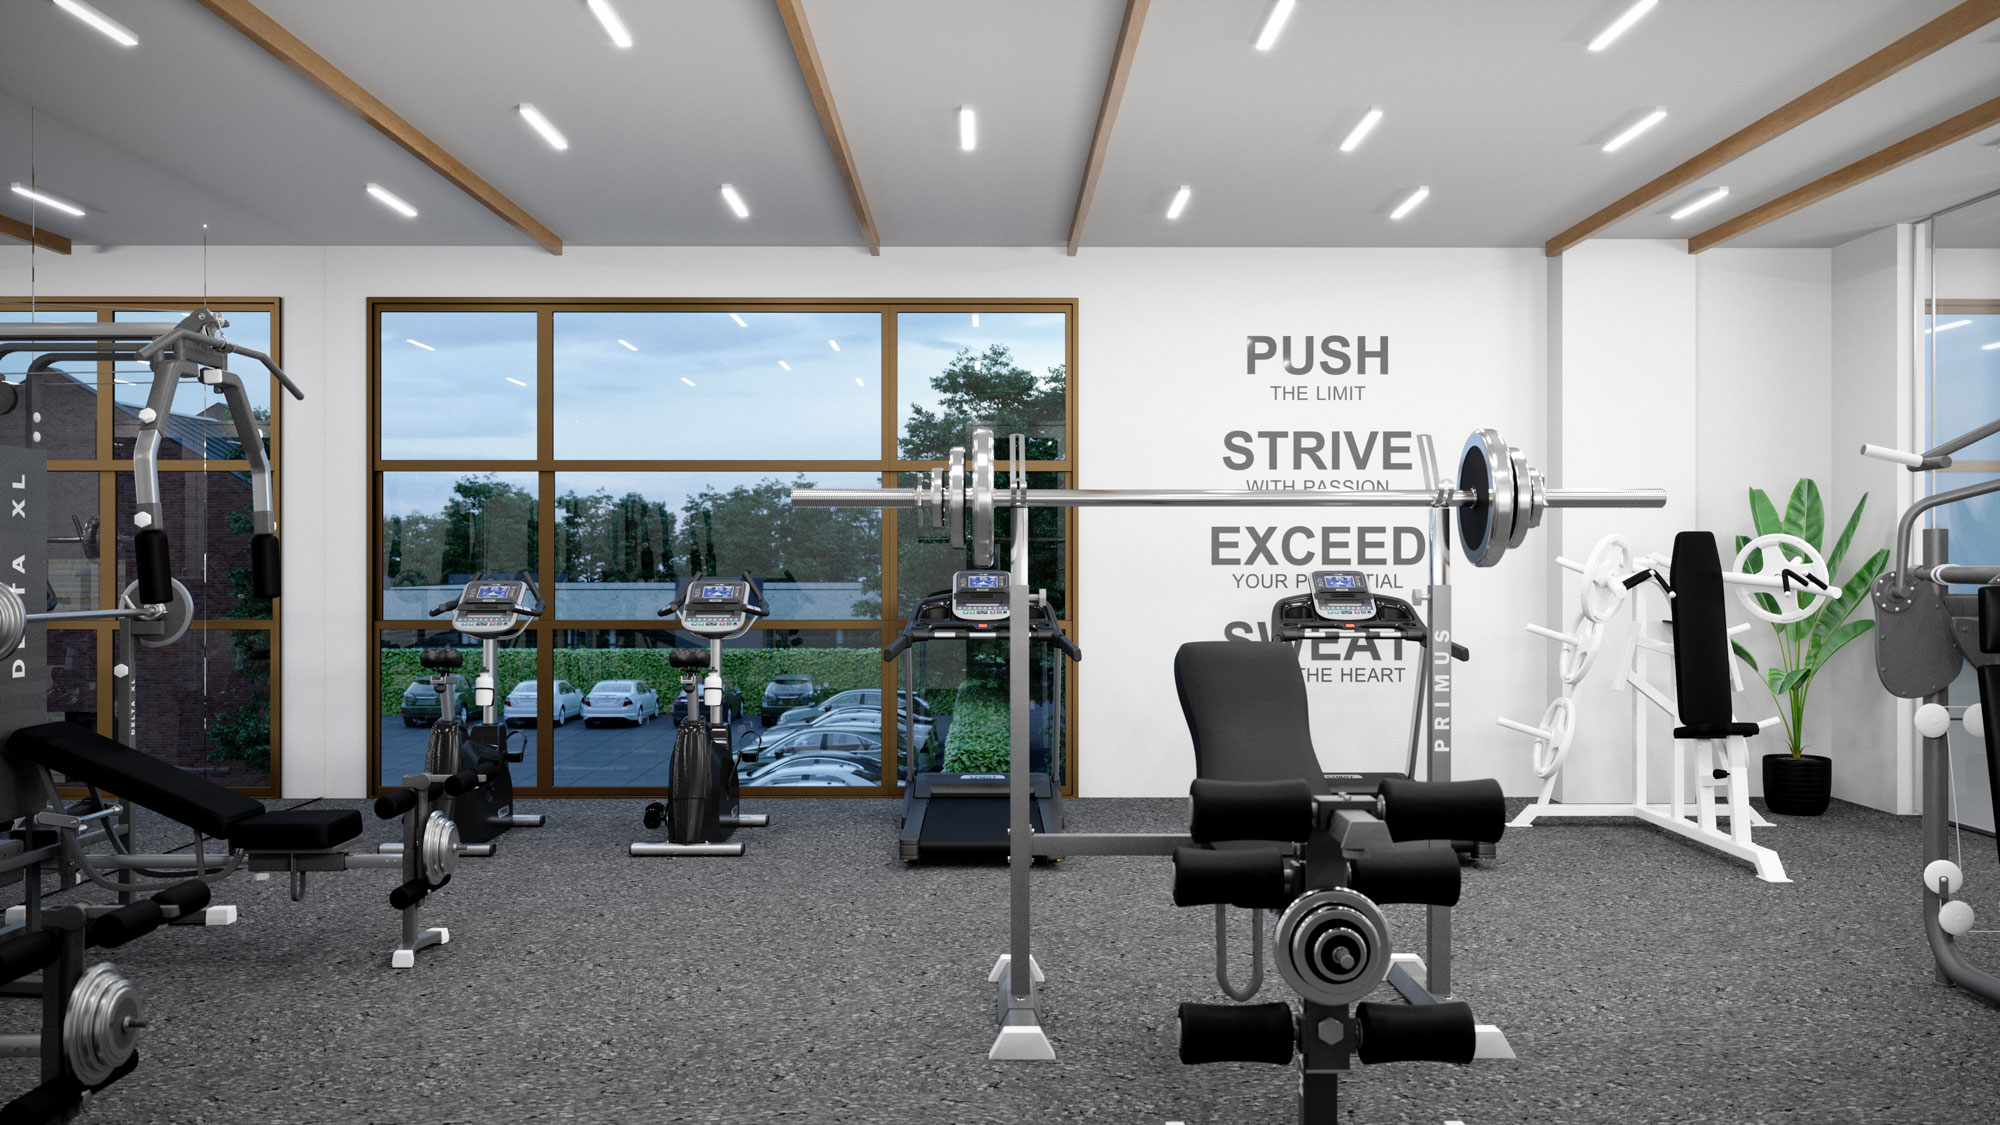 indoor gym area with lifting machines, workout machines, tvs, water fountain, and weights